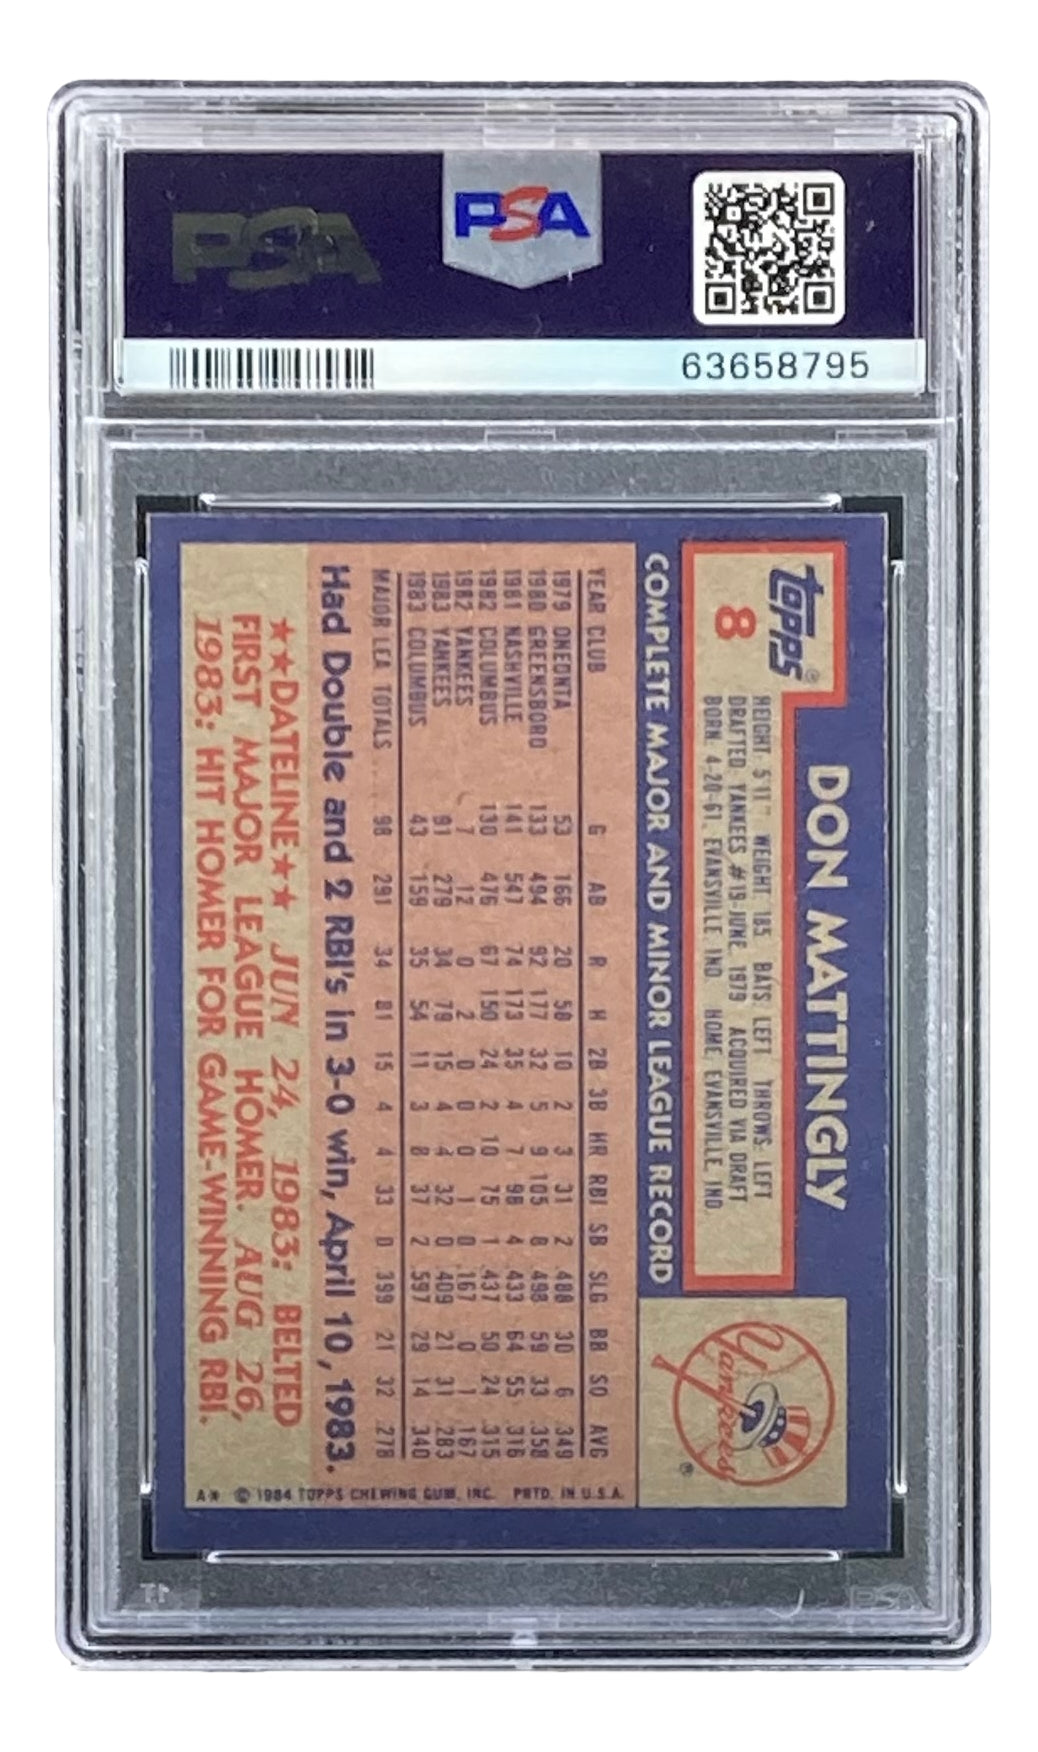 Don Mattingly Autographed 1984 Topps Rookie Card #8 New York